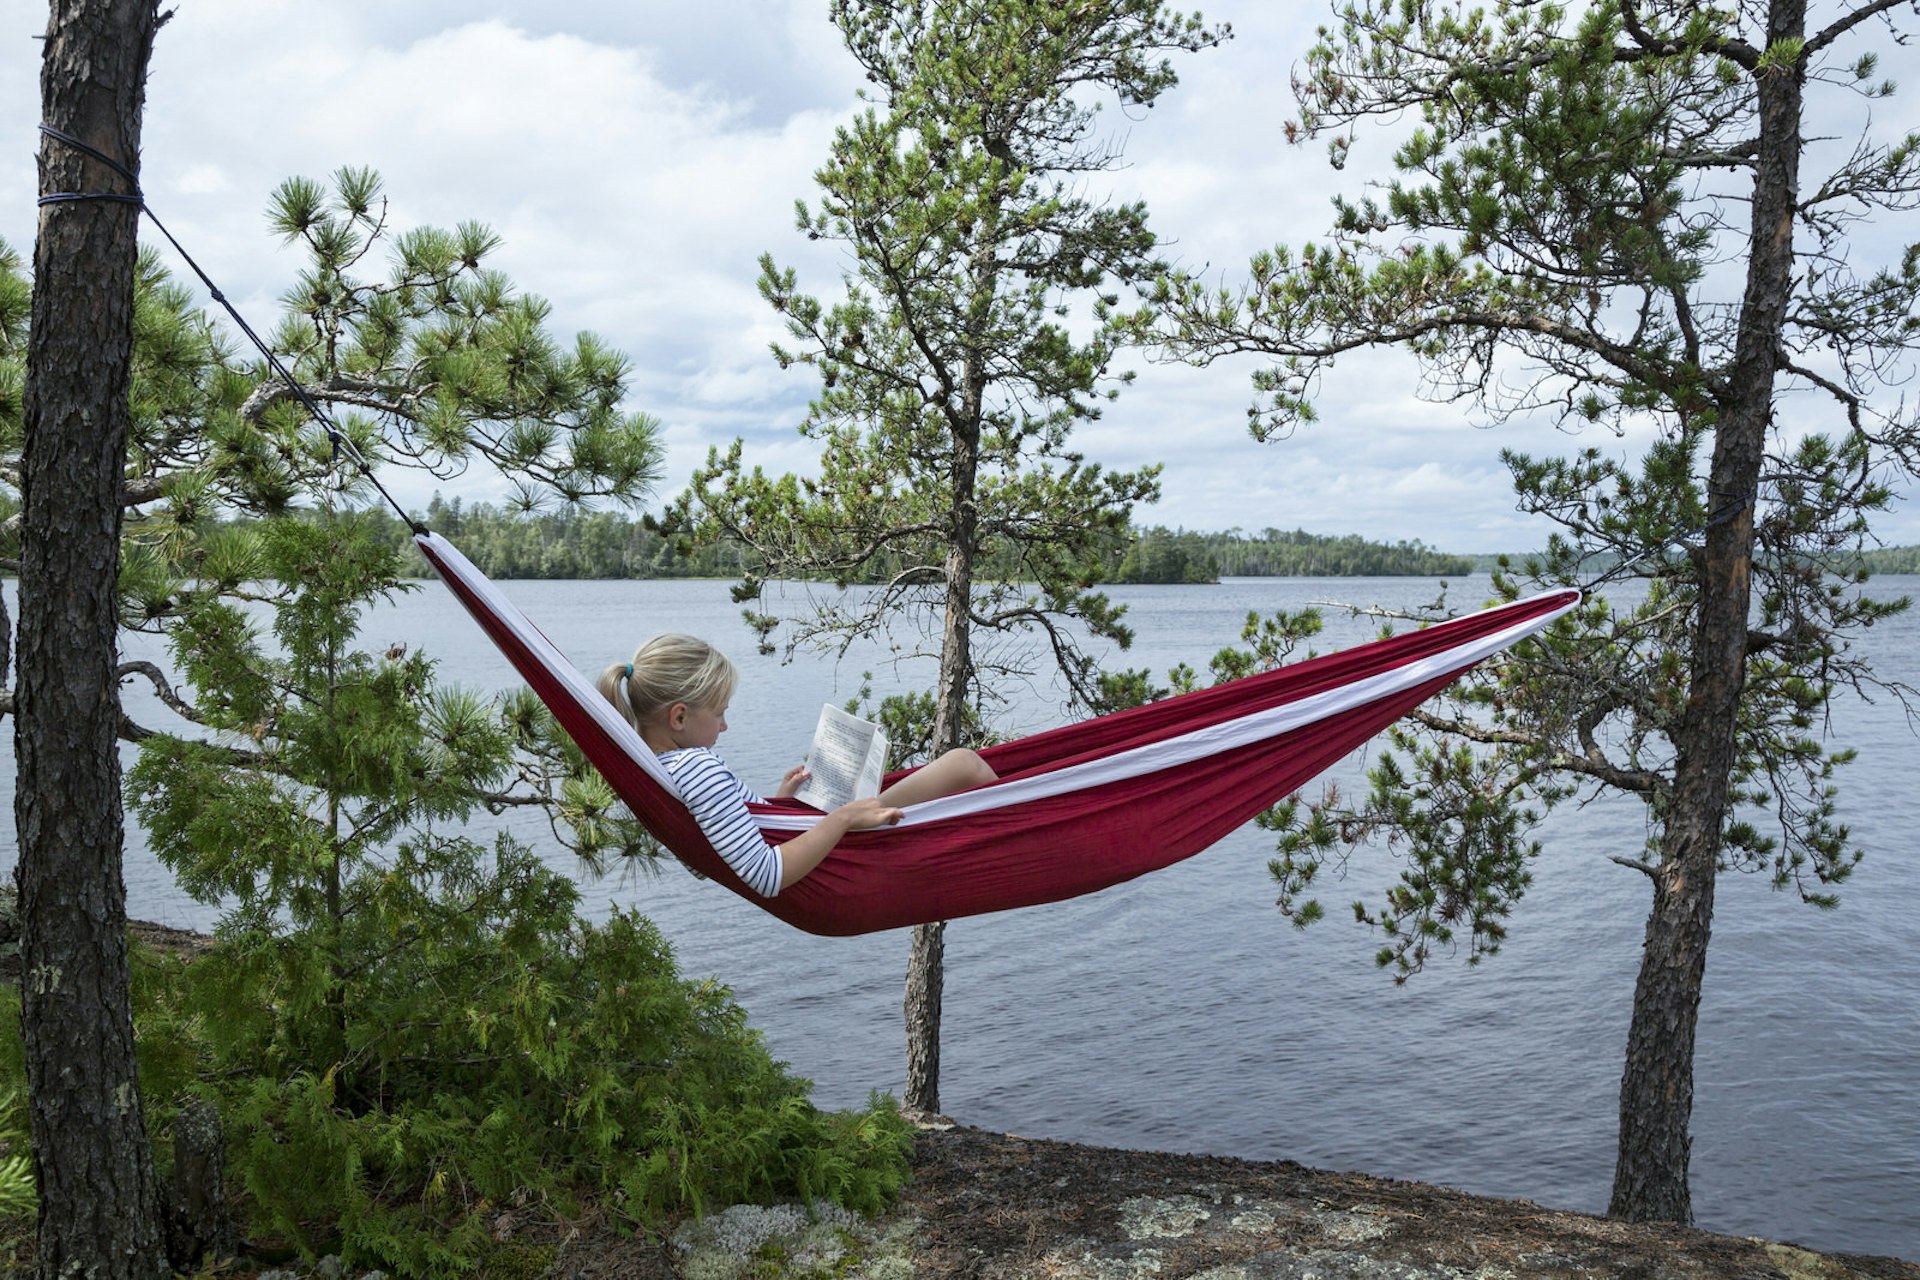 Homework’s so much more appealing when it’s done from a hammock © Per Breiehagen / Getty Images